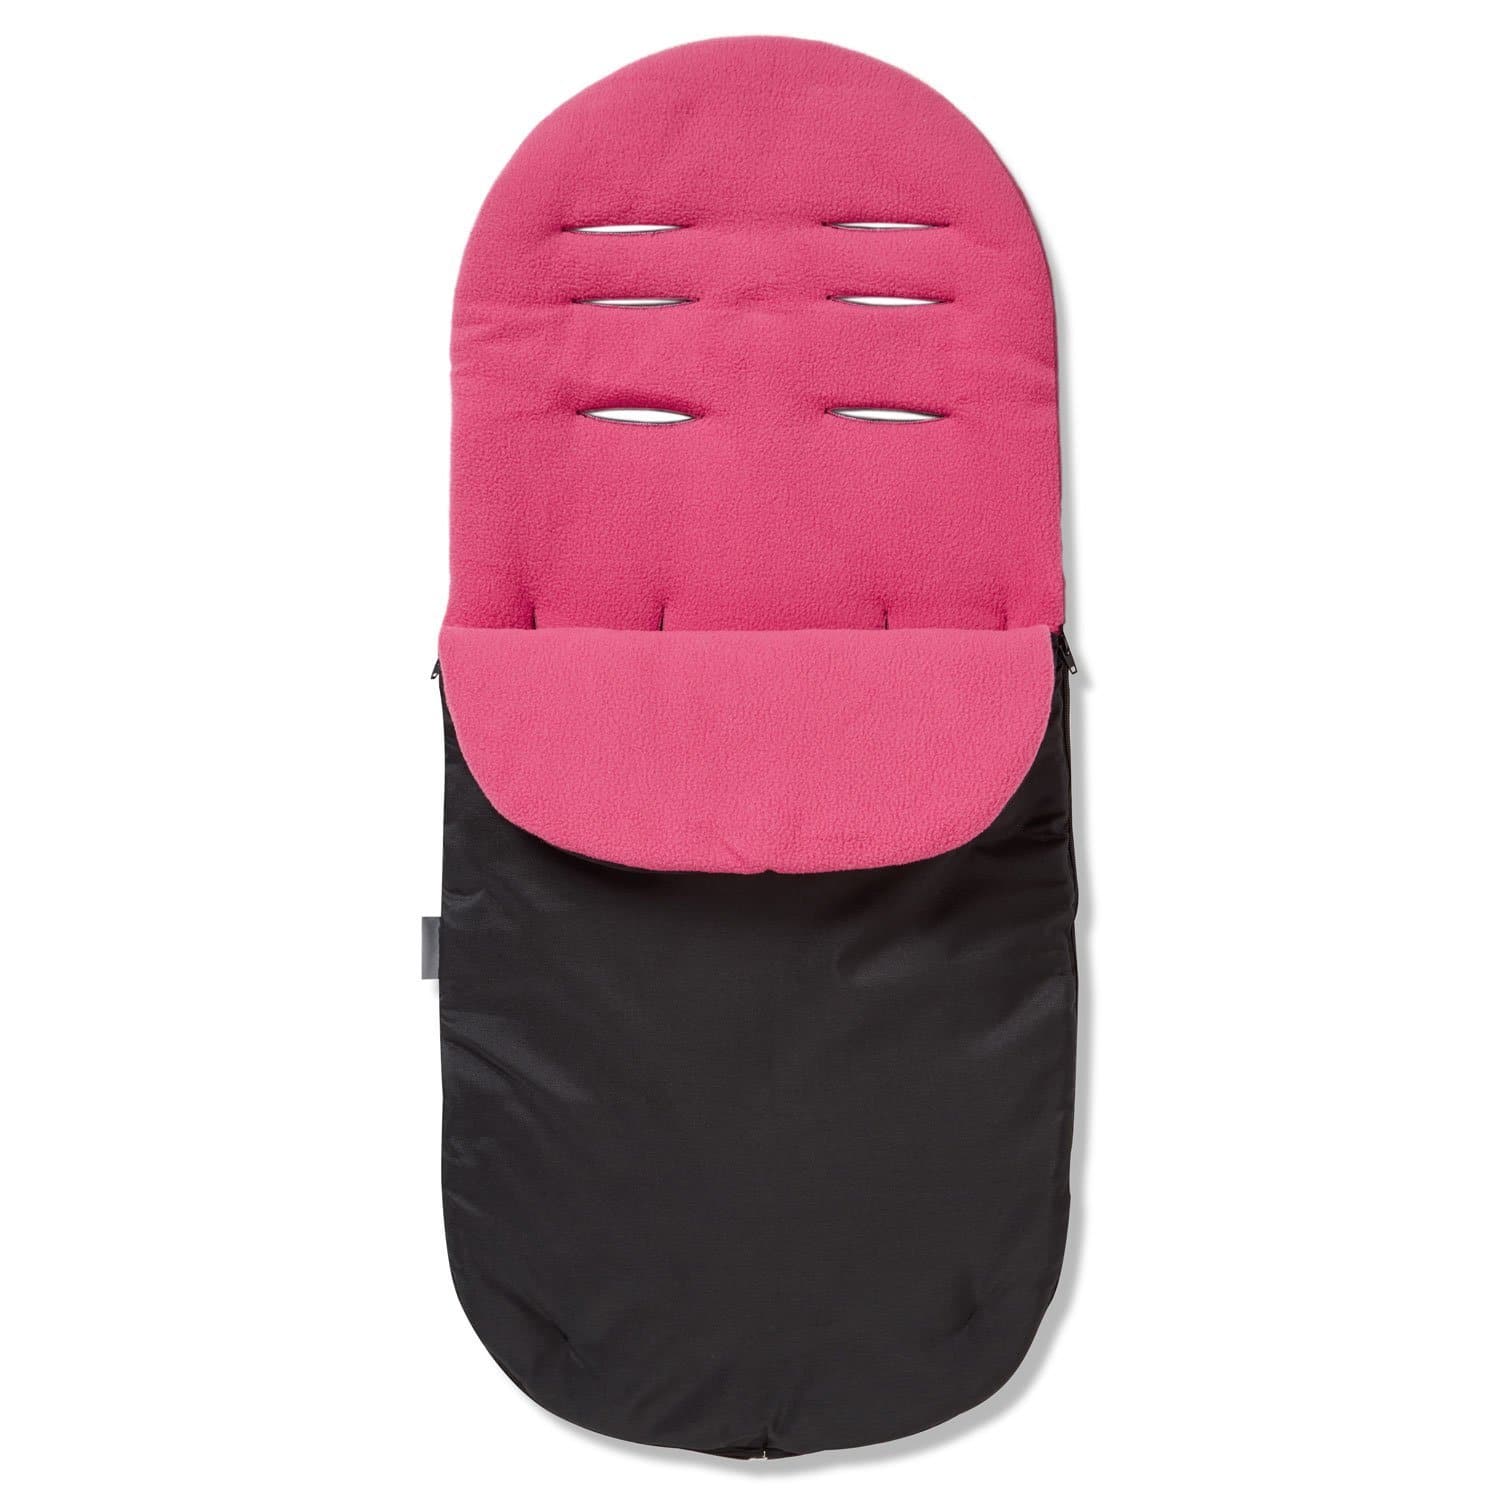 Footmuff / Cosy Toes Compatible with Baby Jogger - Dark Pink / Fits All Models | For Your Little One